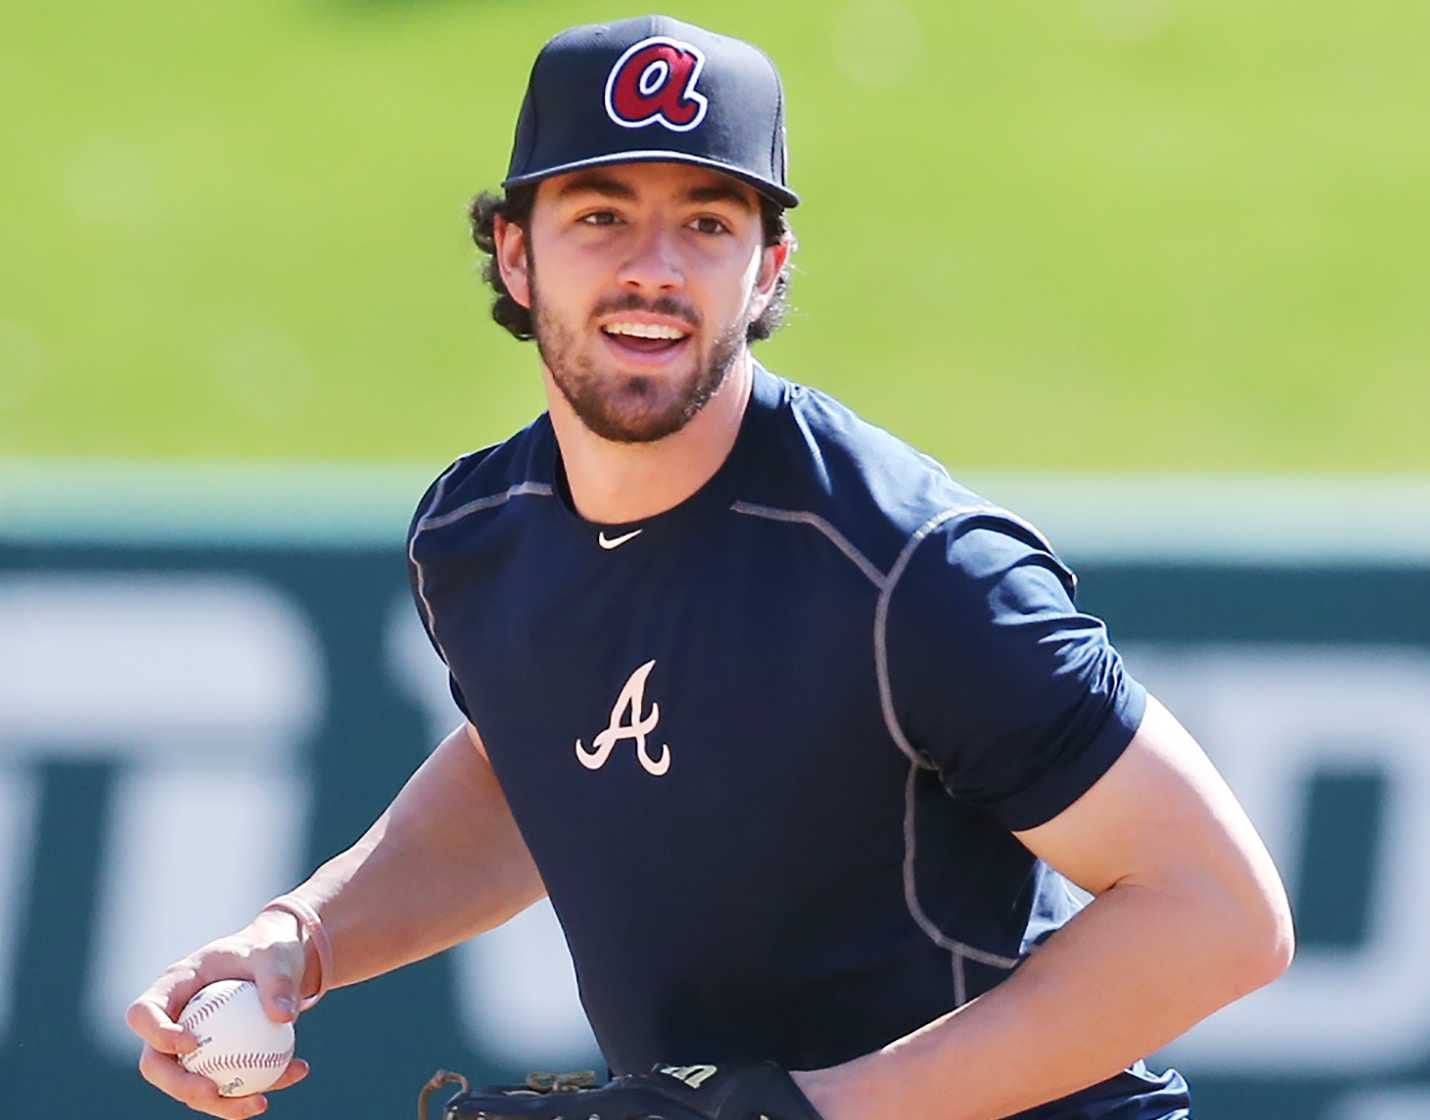 Video: Braves' Swanson is player to watch in Futures Game